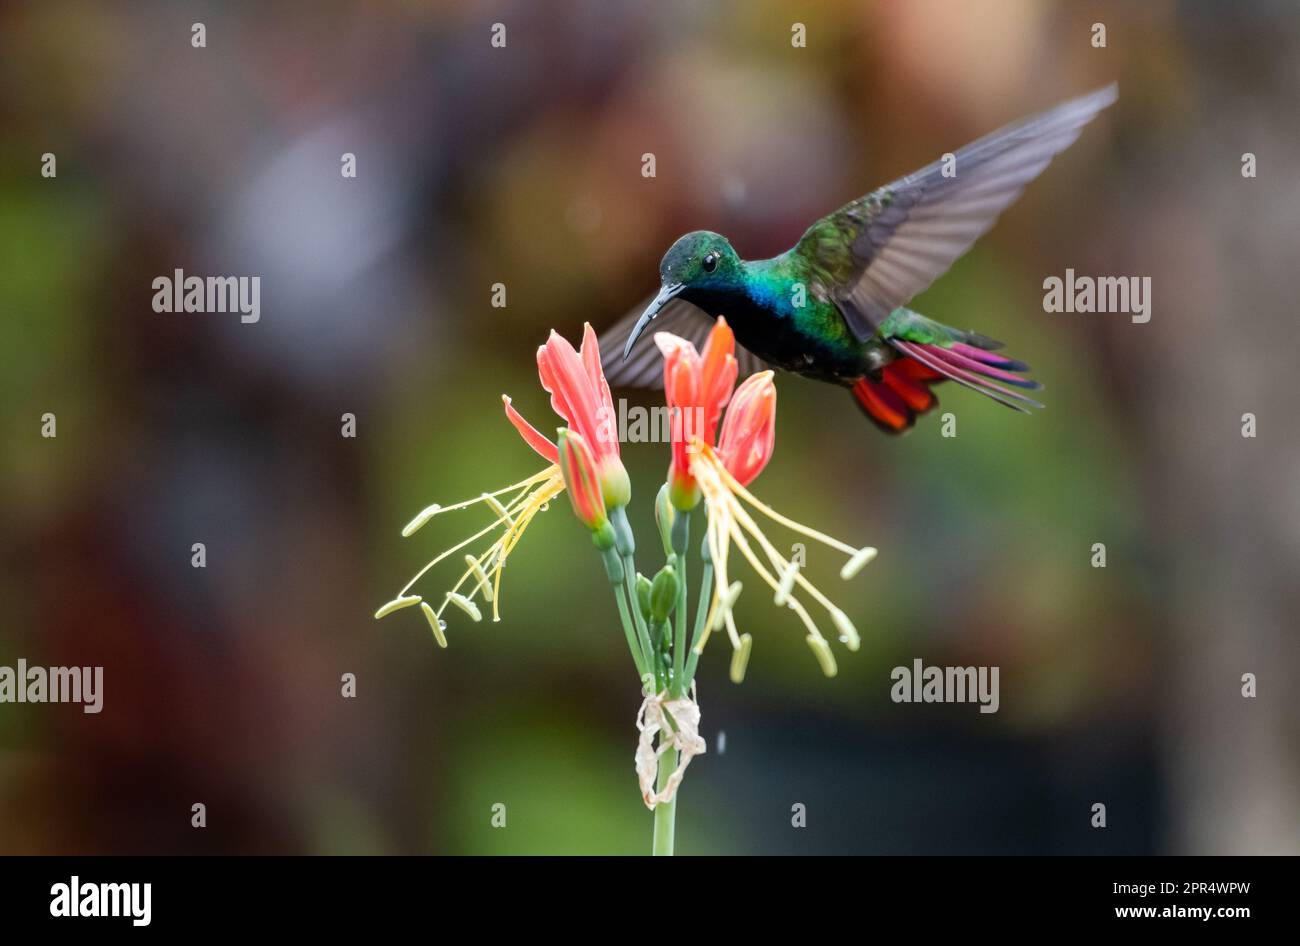 Black-throated Mango hummingbird with raindrops on his beak flying next to a tropical lily. Stock Photo